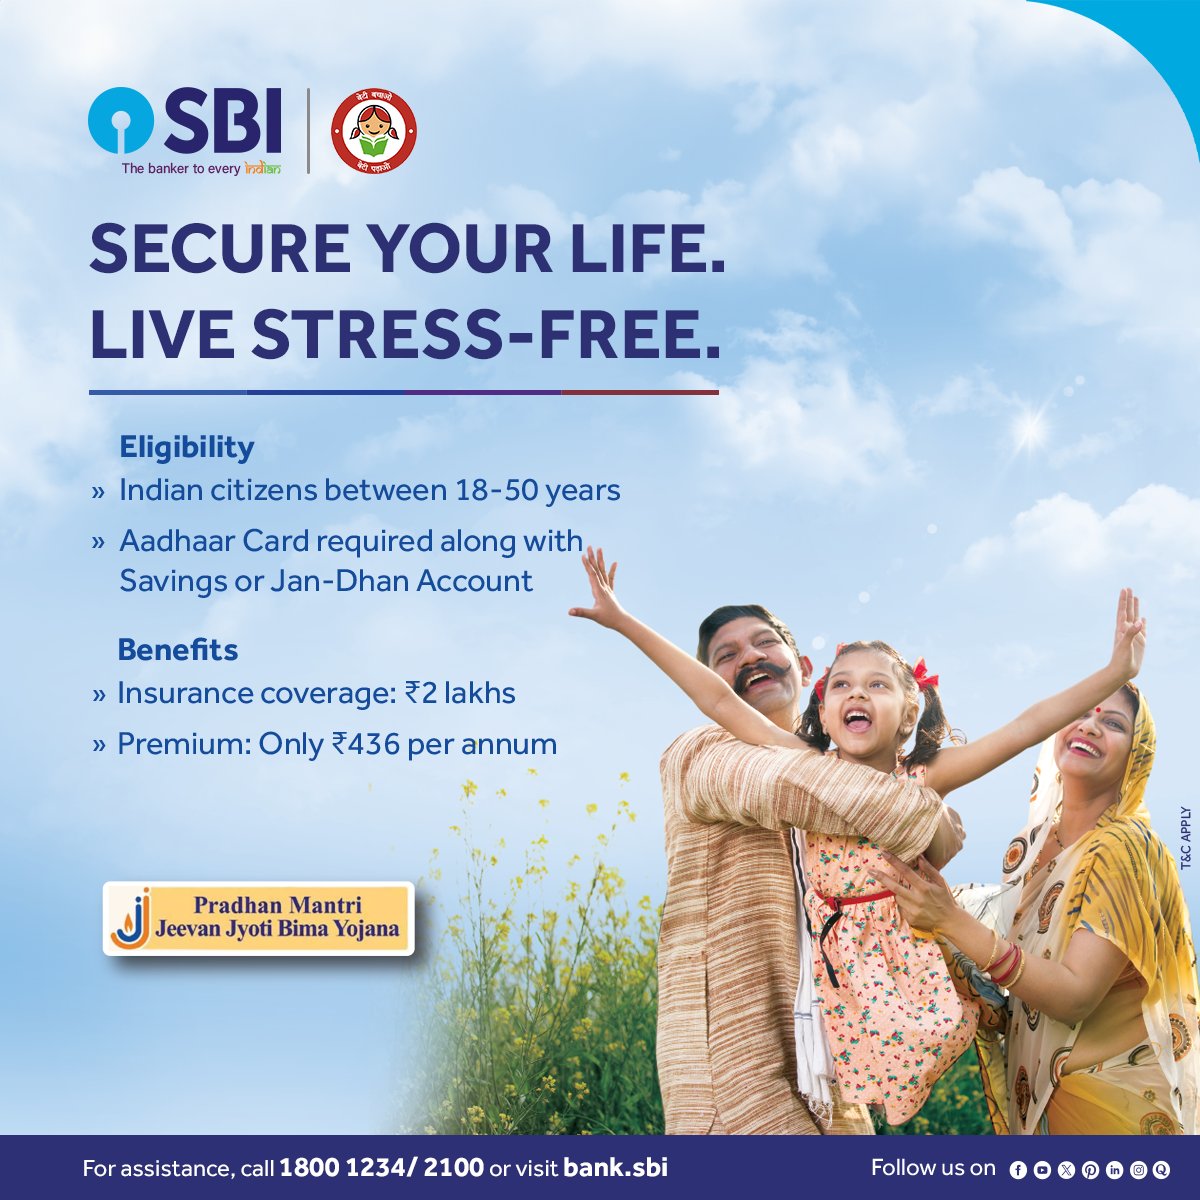 Bringing to you the Pradhan Mantri Jeevan Jyoti Bima Yojana - a safety net for your loved ones, ensuring their future is secured with minimal investment. Join the program by investing only ₹ 436 per annum and live each day with confidence knowing that your family's financial